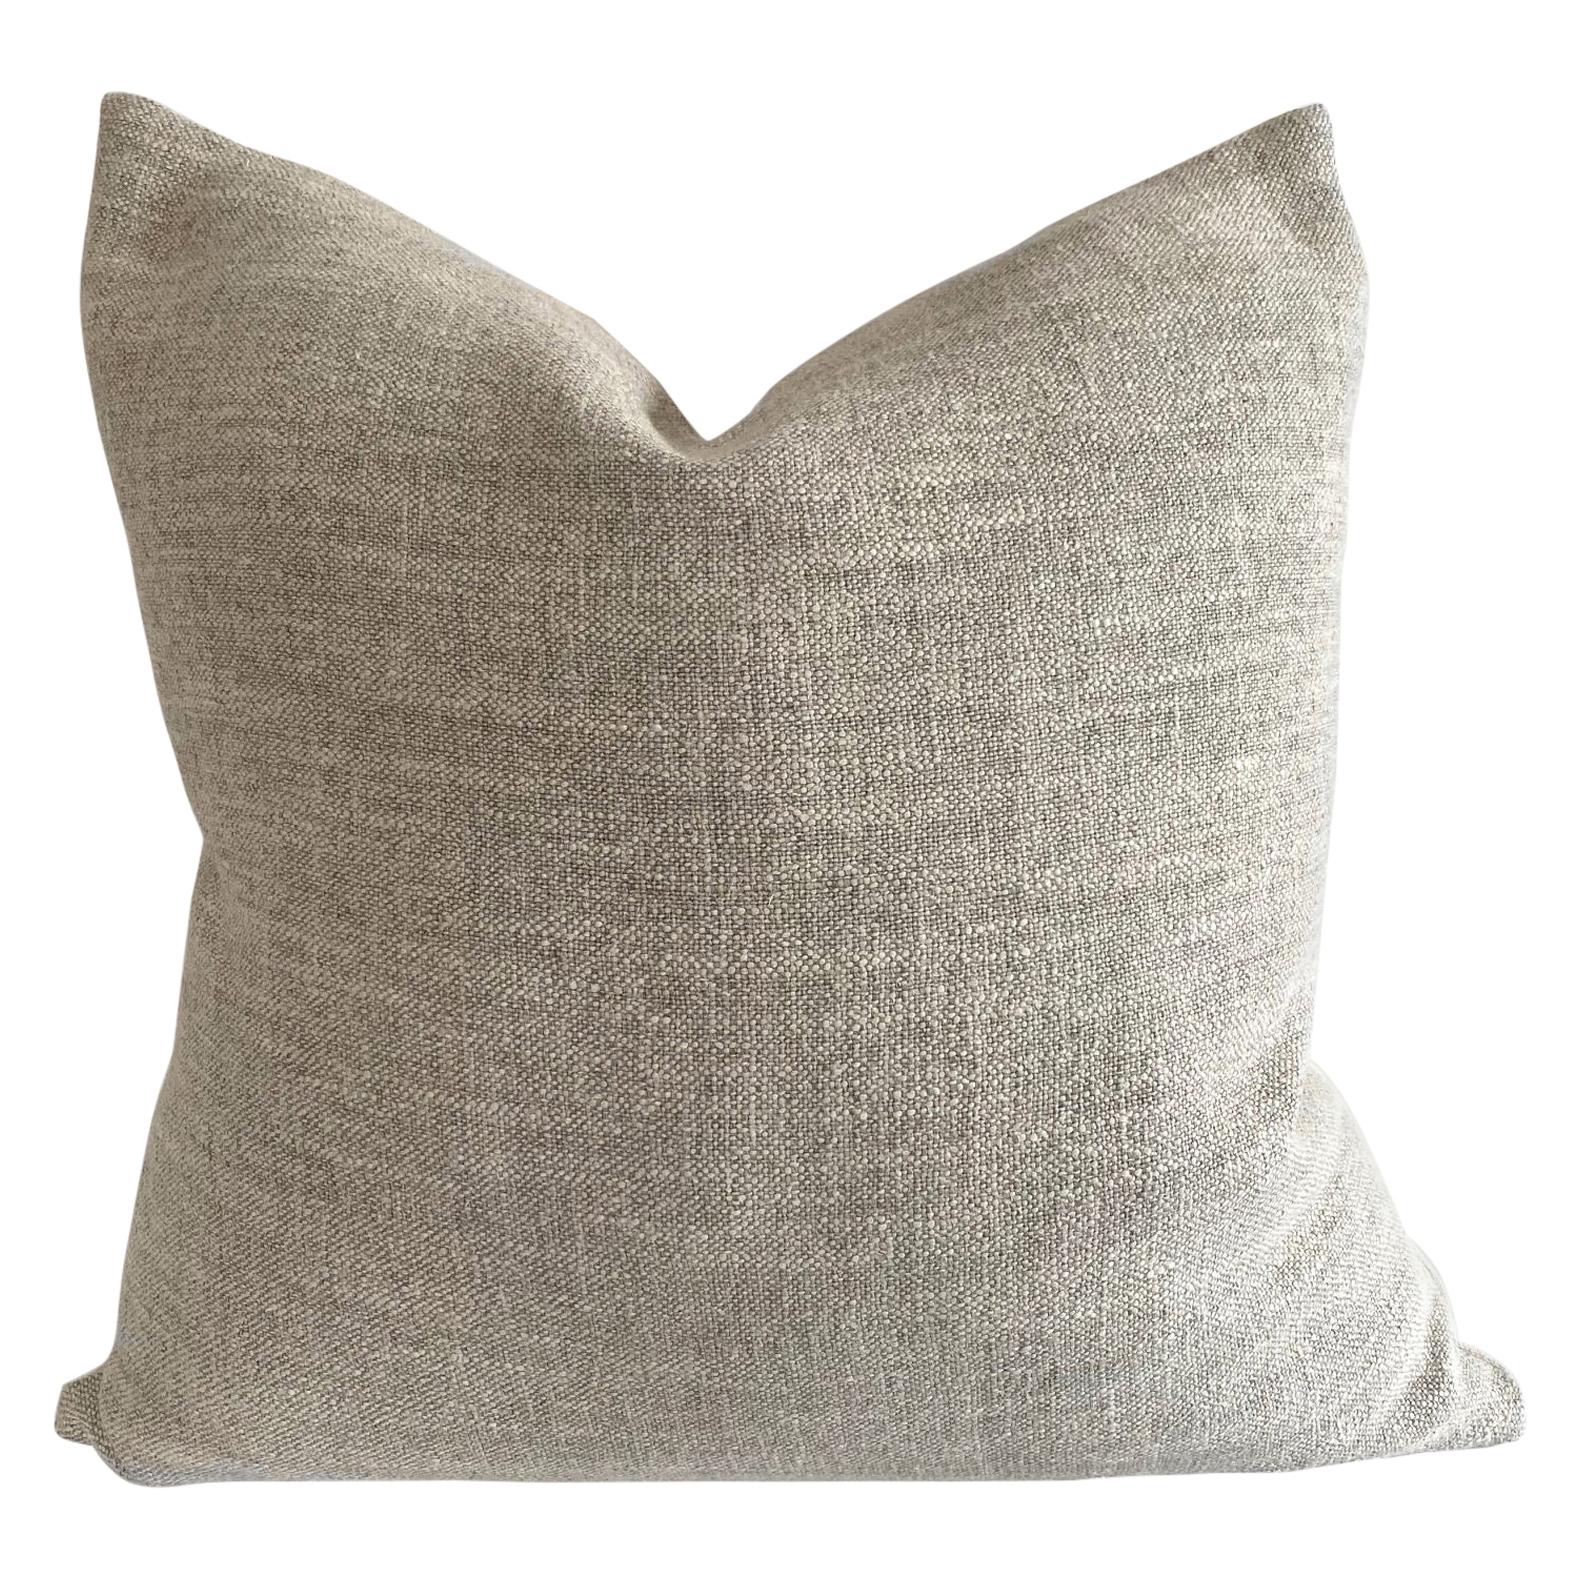 Custom Nubby Gray Linen Accent Pillow with Down Feather Insert